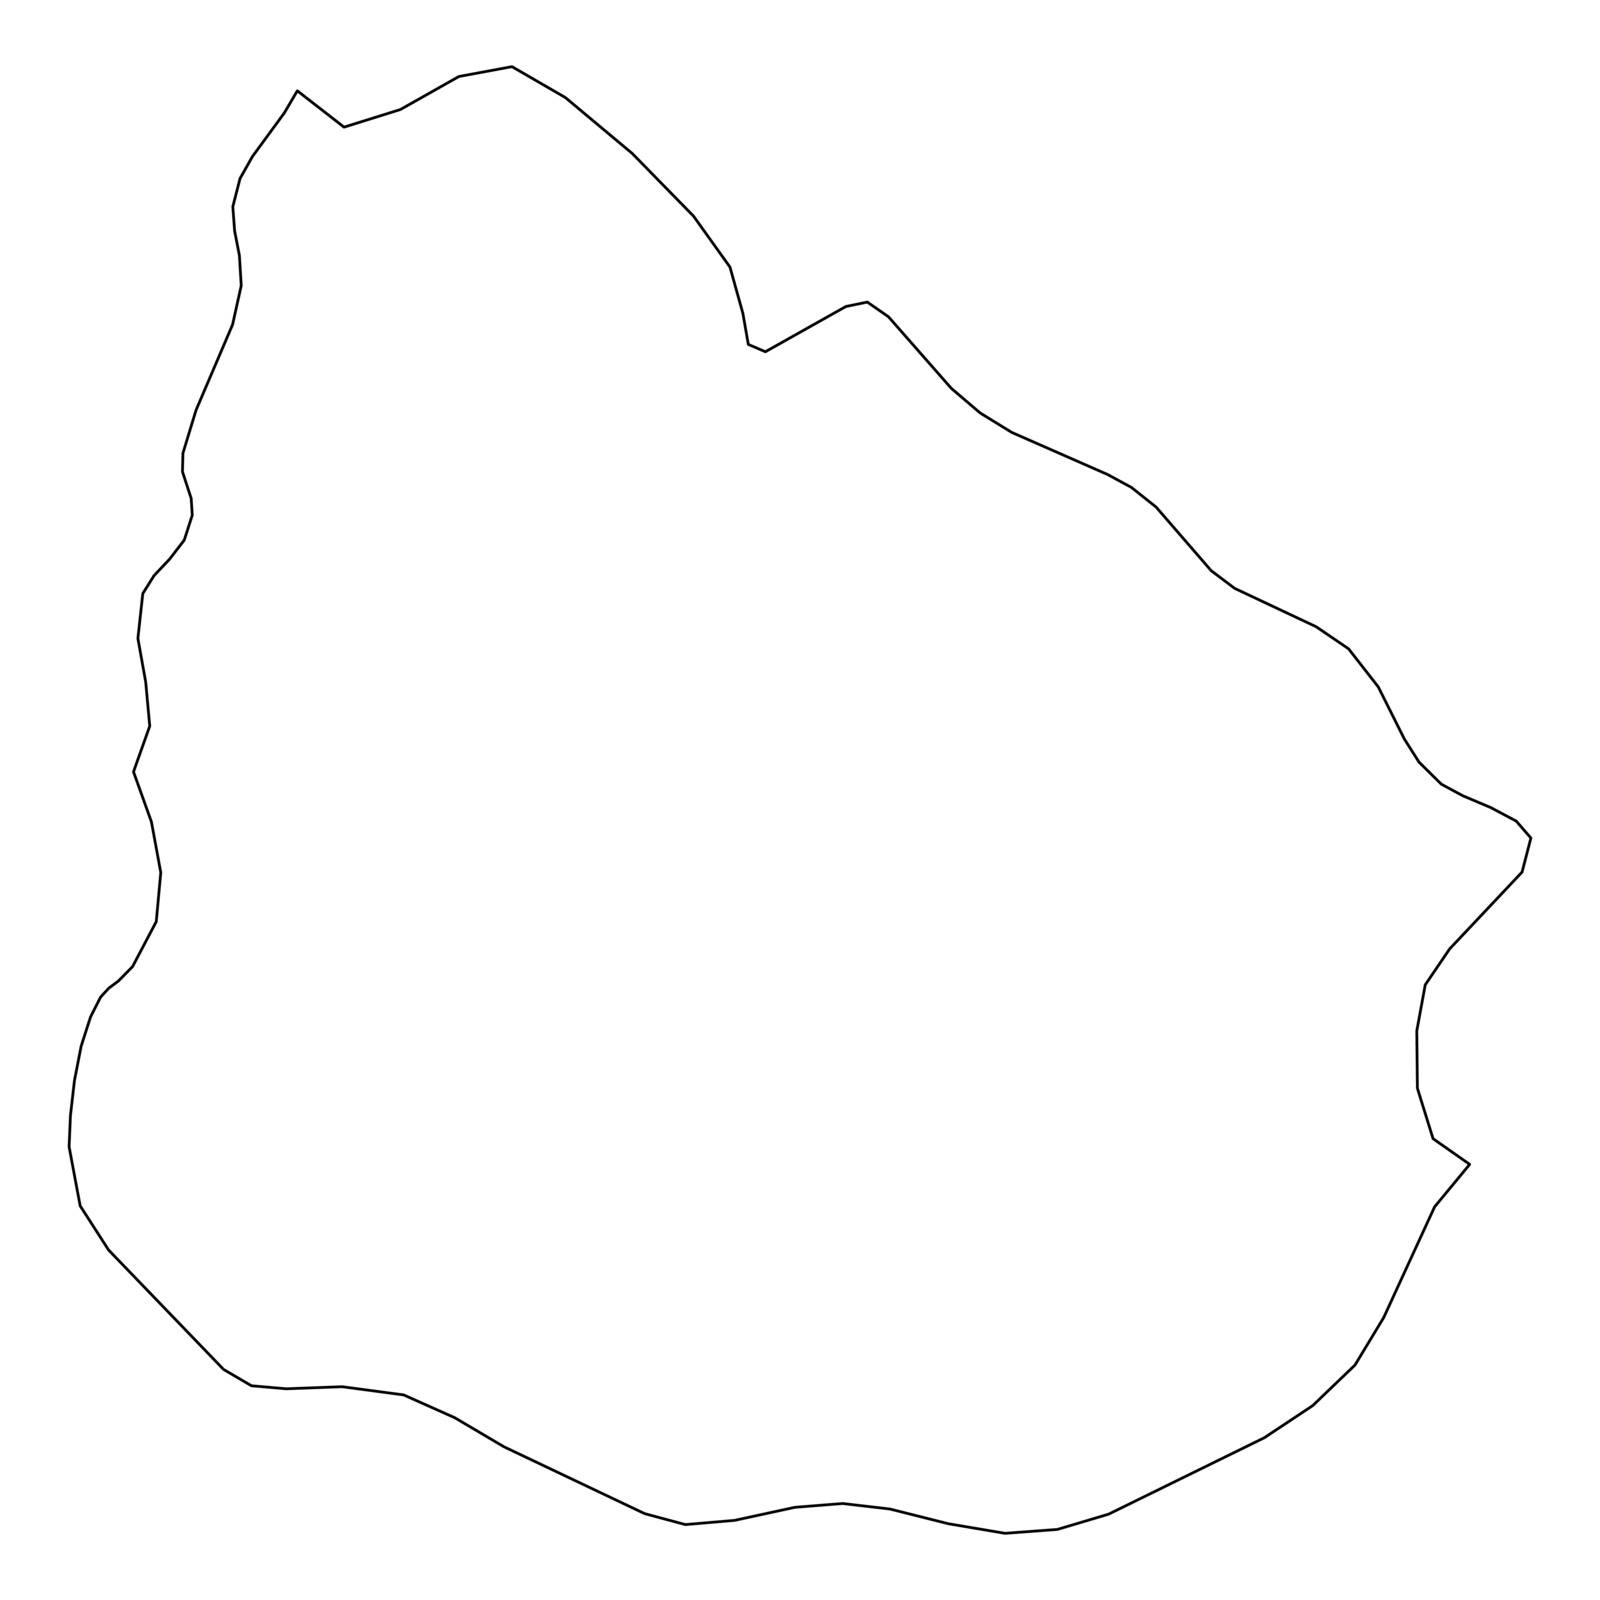 Uruguay - solid black outline border map of country area. Simple flat vector illustration.